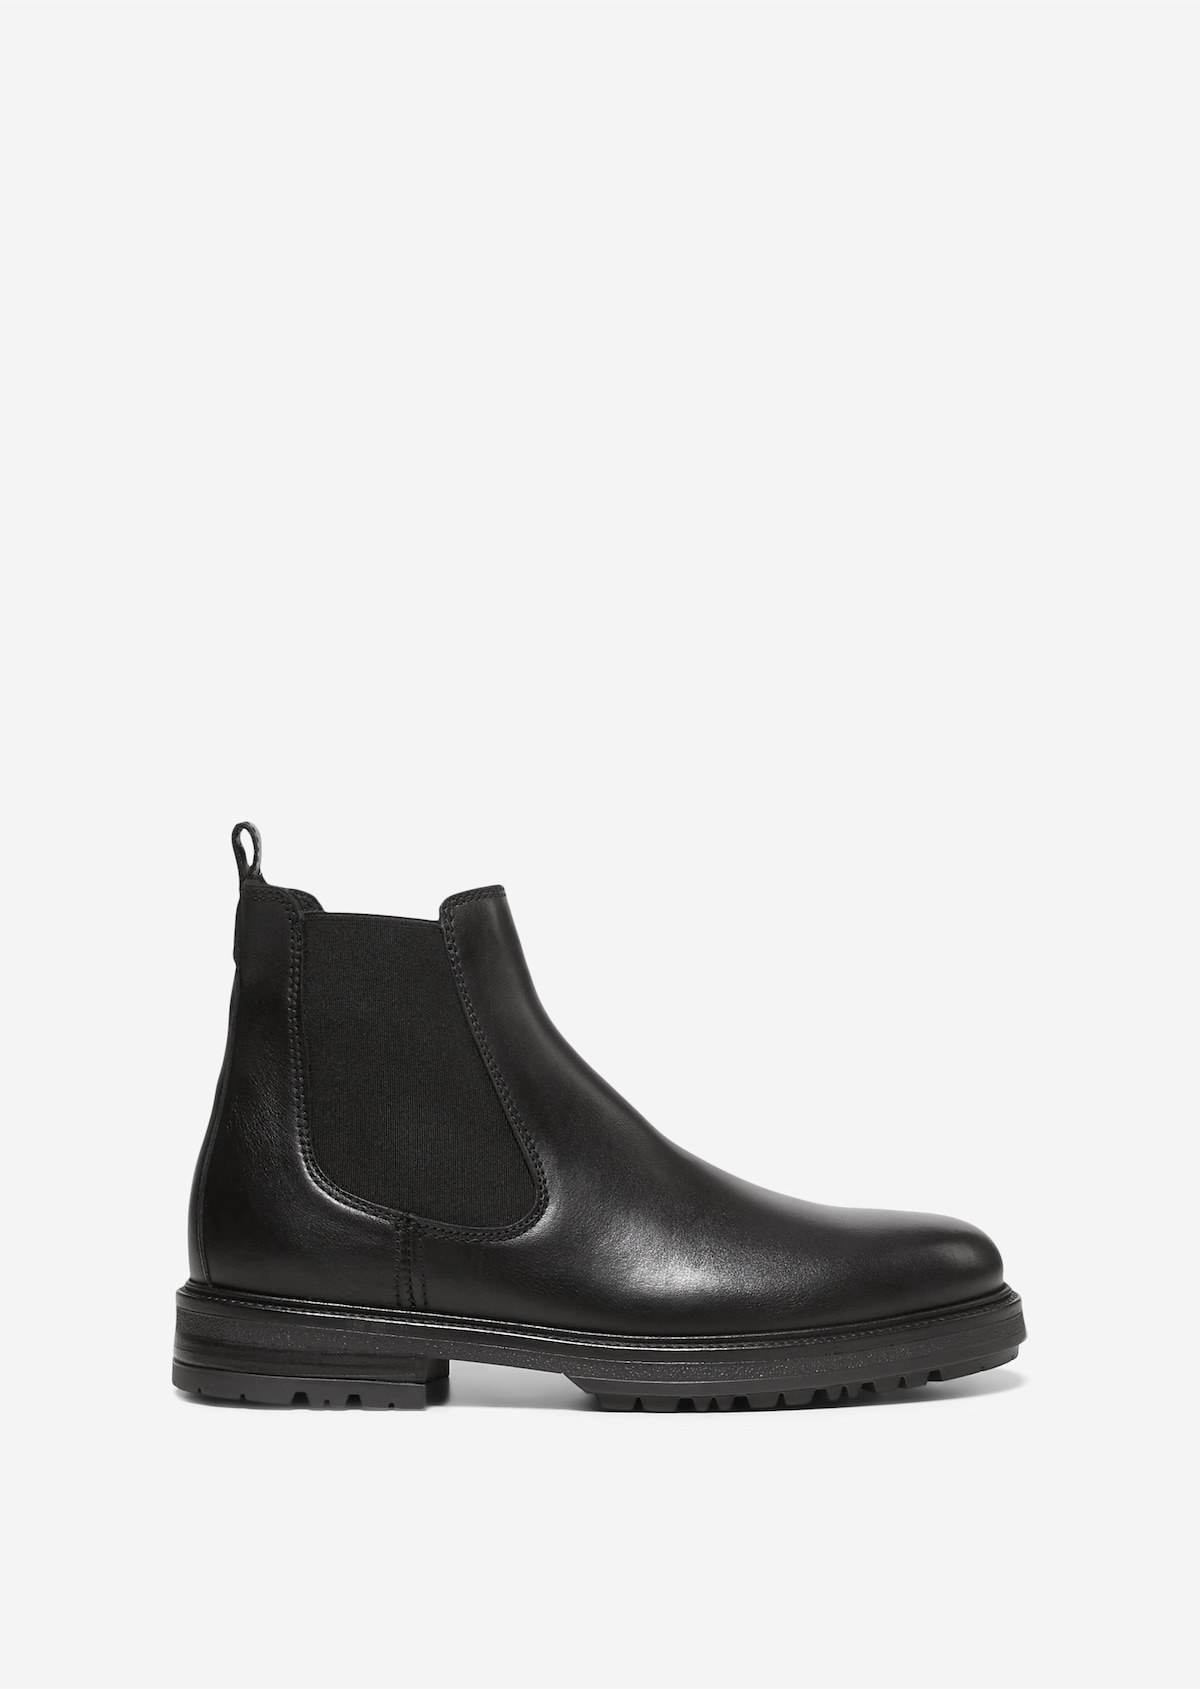 Chelsea boot made from fine cowhide - black | Chelsea boots | MARC O’POLO